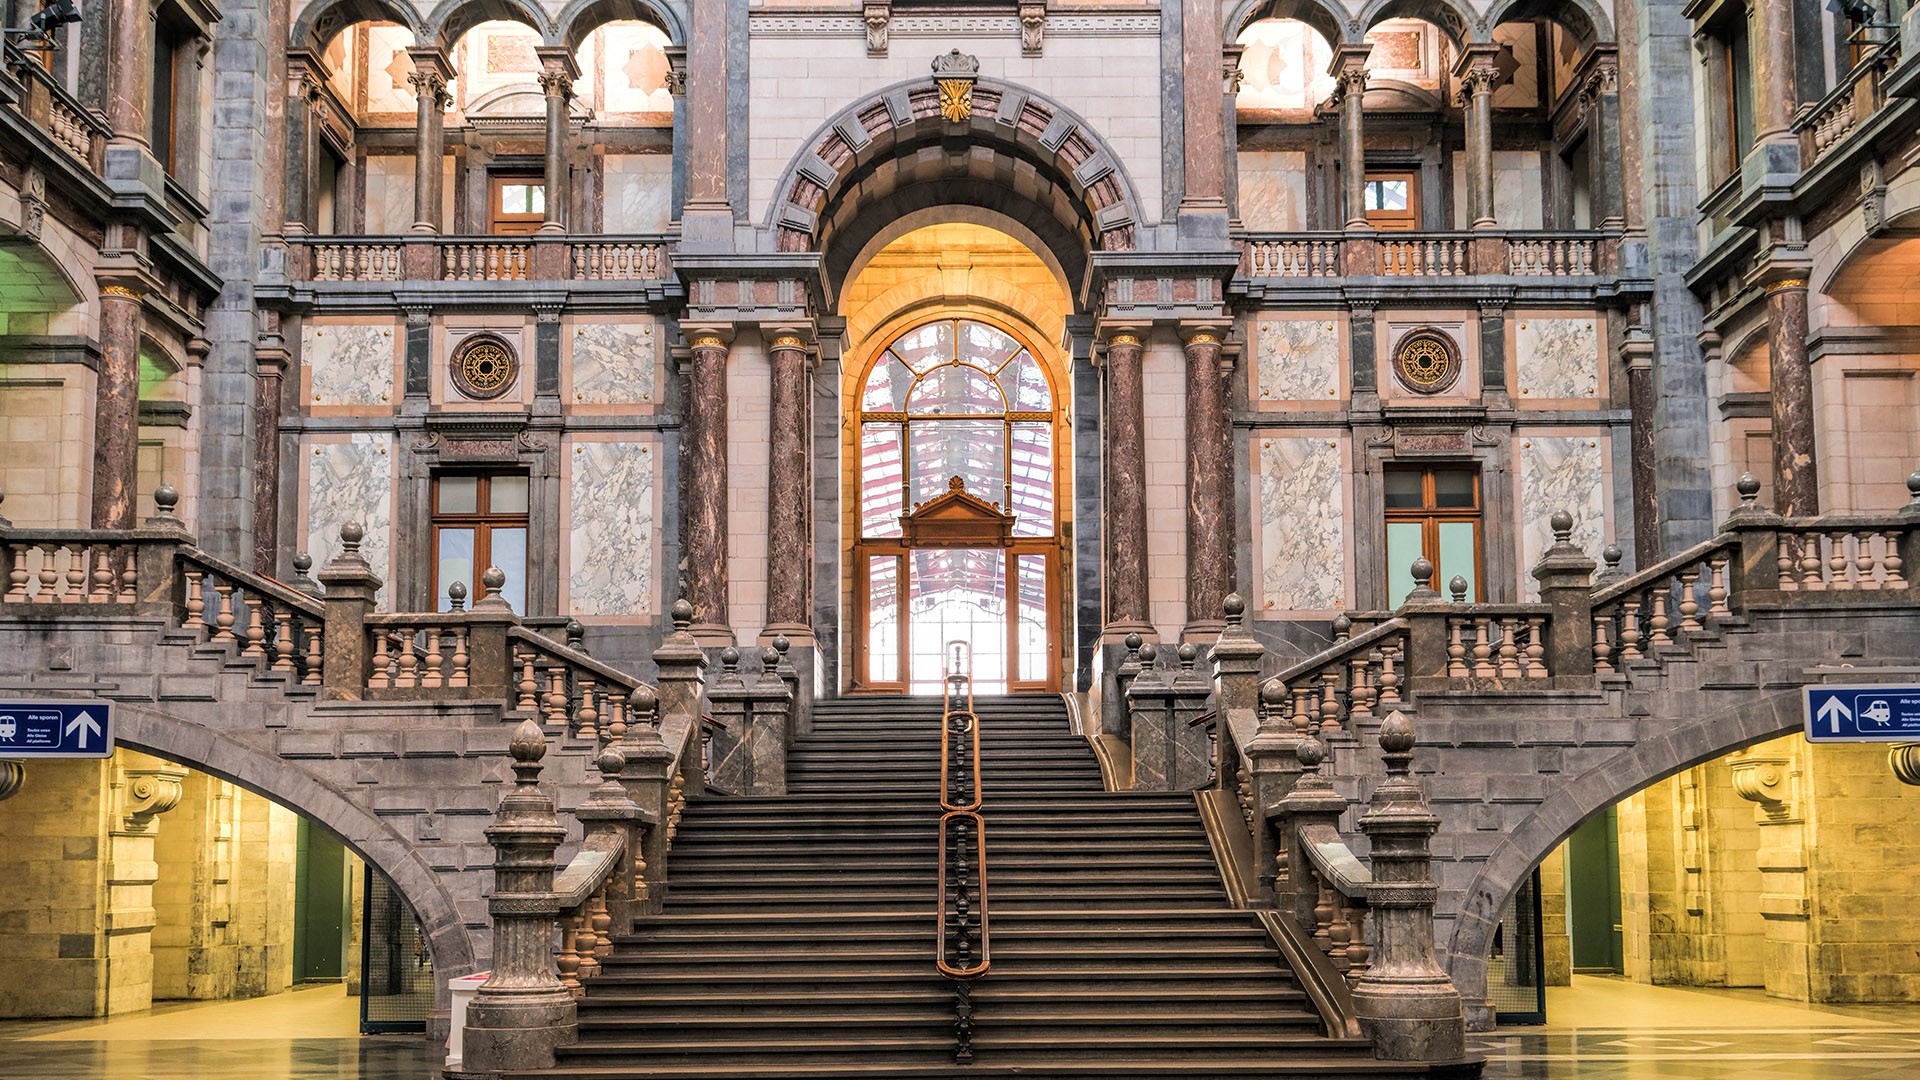 Building Architecture Staircase Old Building Antwerp Train Station Belgium Arch 1920x1080